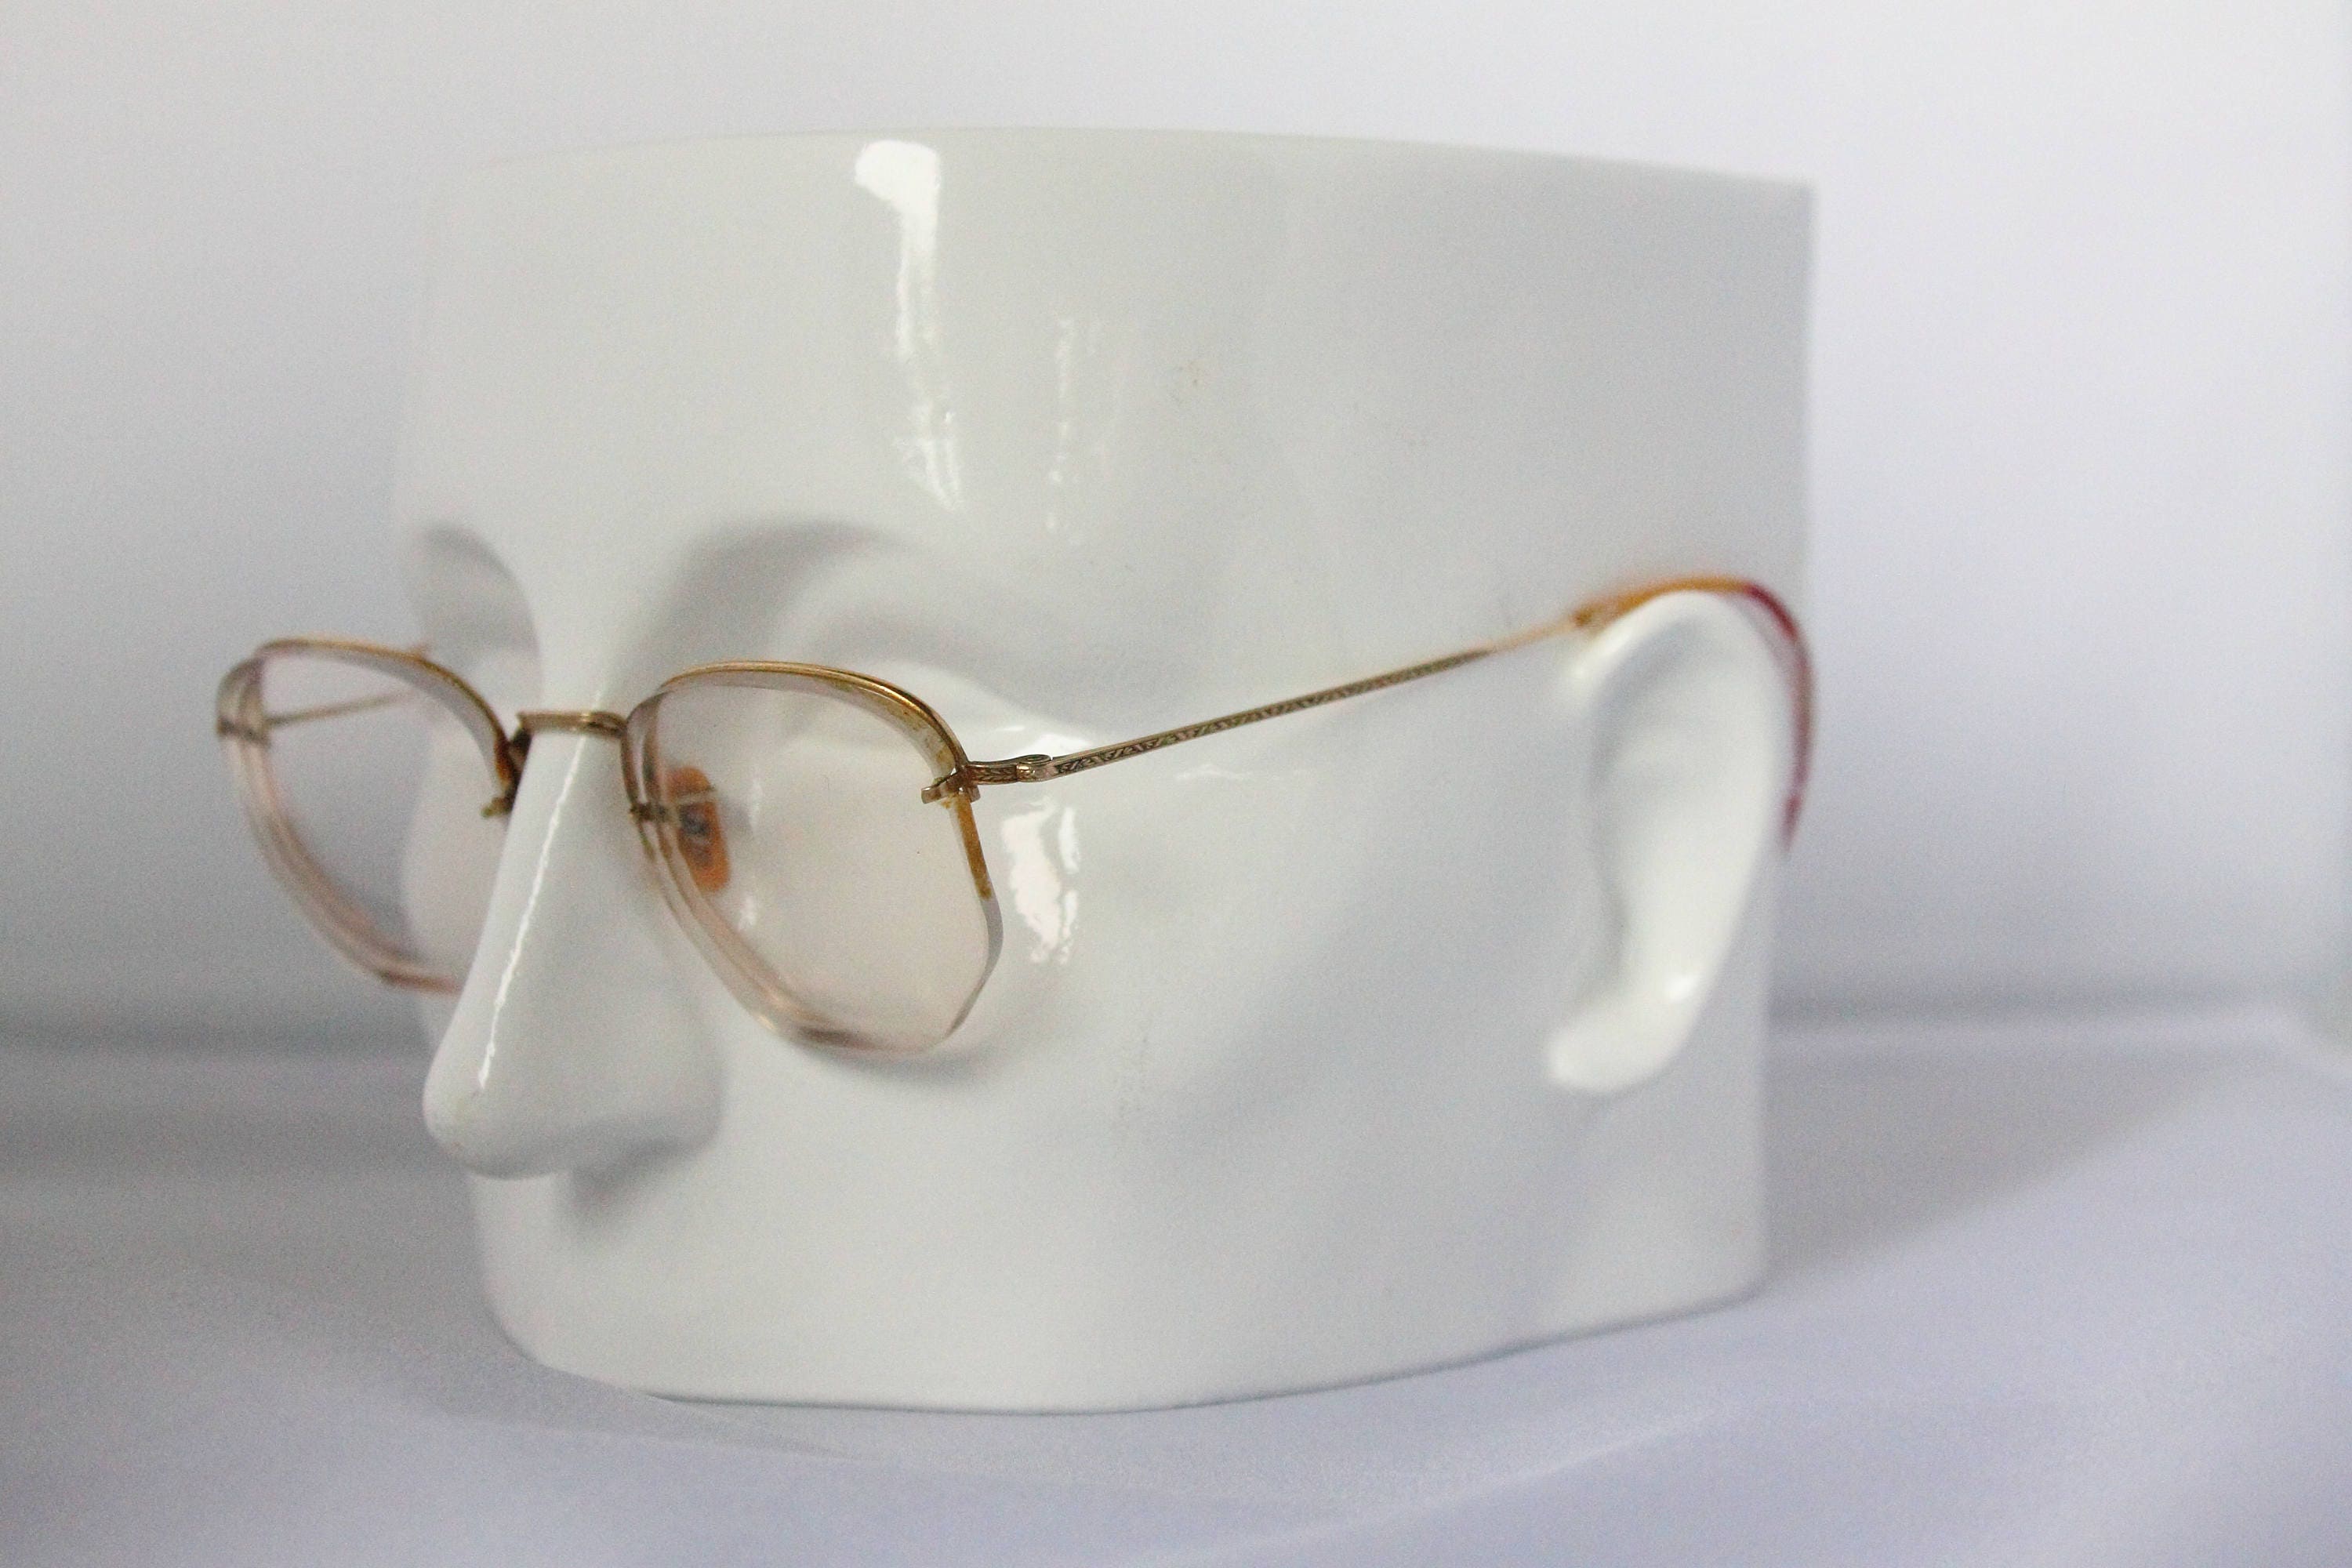 1920s Rimless Gold Filled Geometric Eyeglasses With Deco Patterning By Bausch And Lomb The